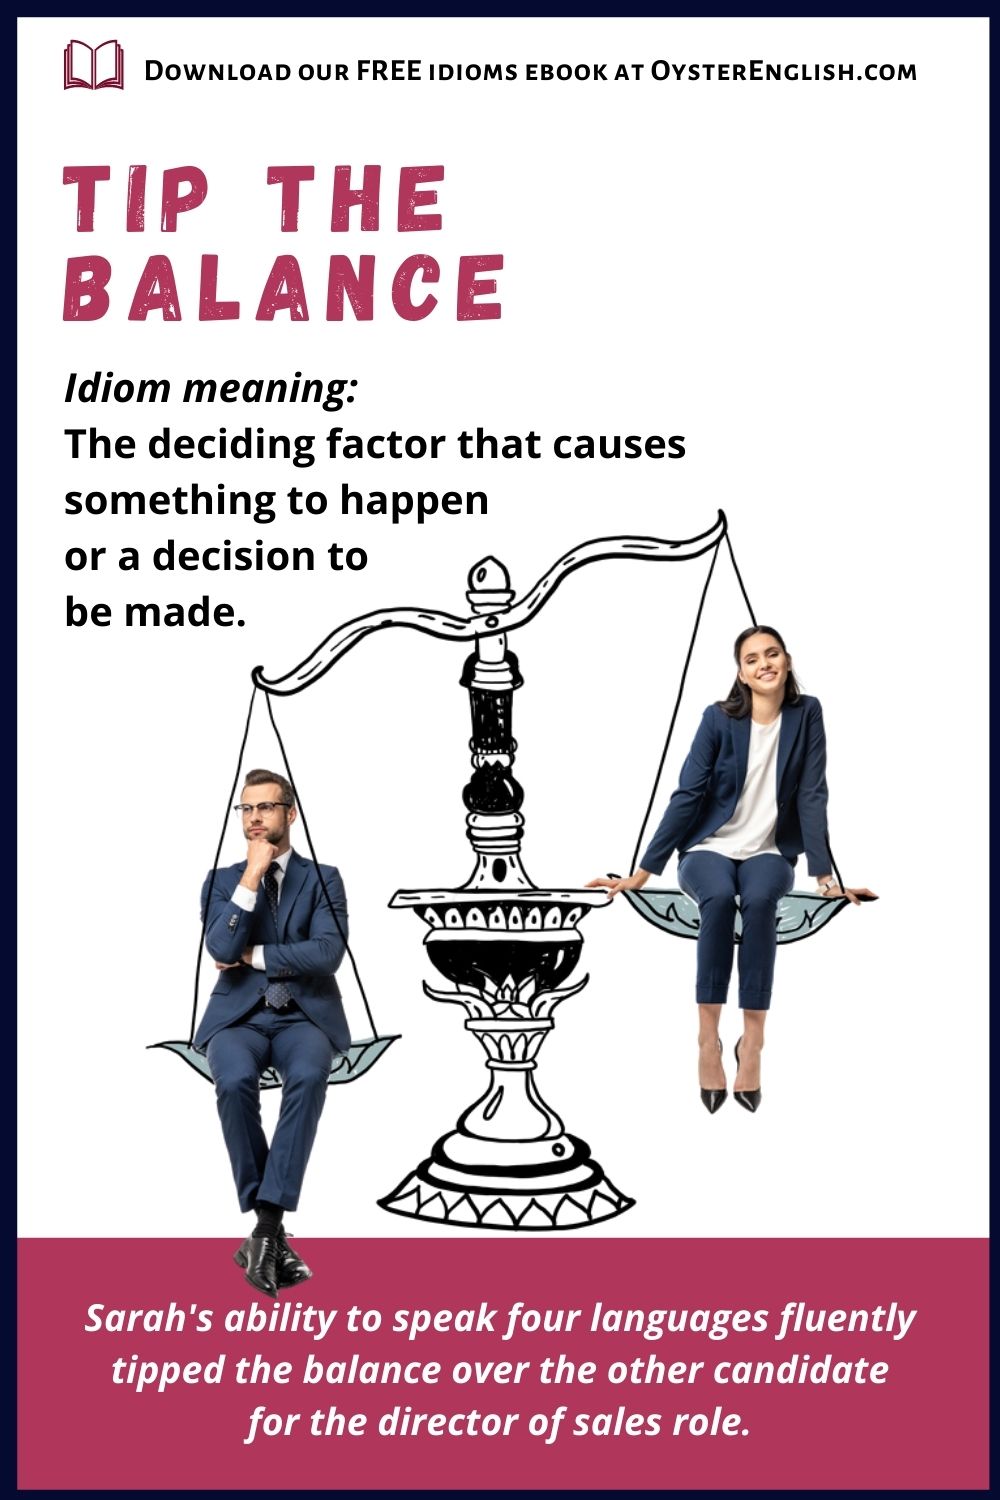 A businessman & businesswoman sit in the pans of a balance scale, with the woman at a higher level. "Sarah's ability to speak 4 languages tipped the balance over the other candidate."